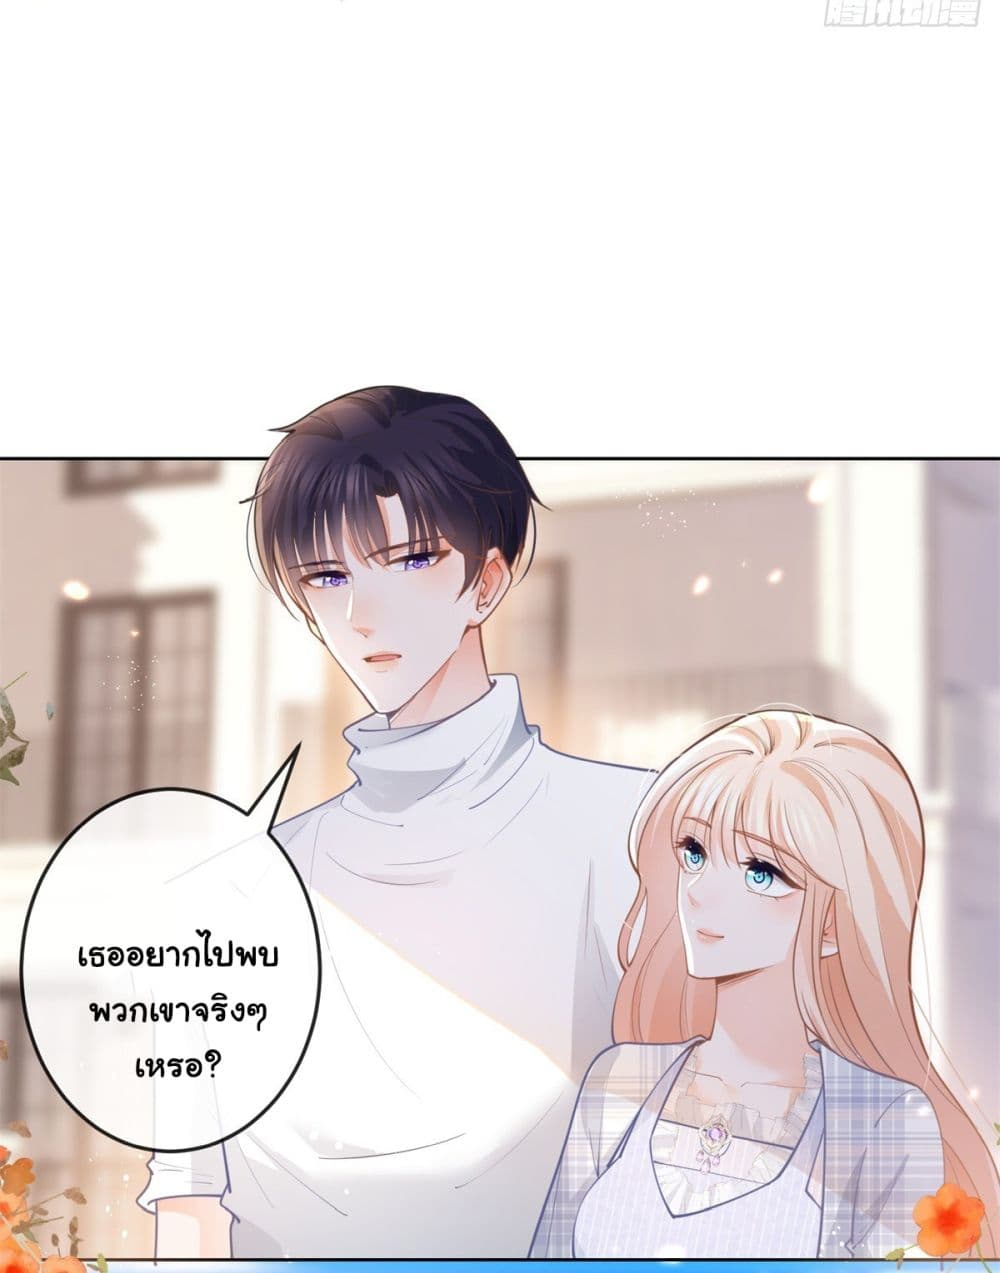 The Lovely Wife And Strange Marriage ตอนที่ 386 (4)